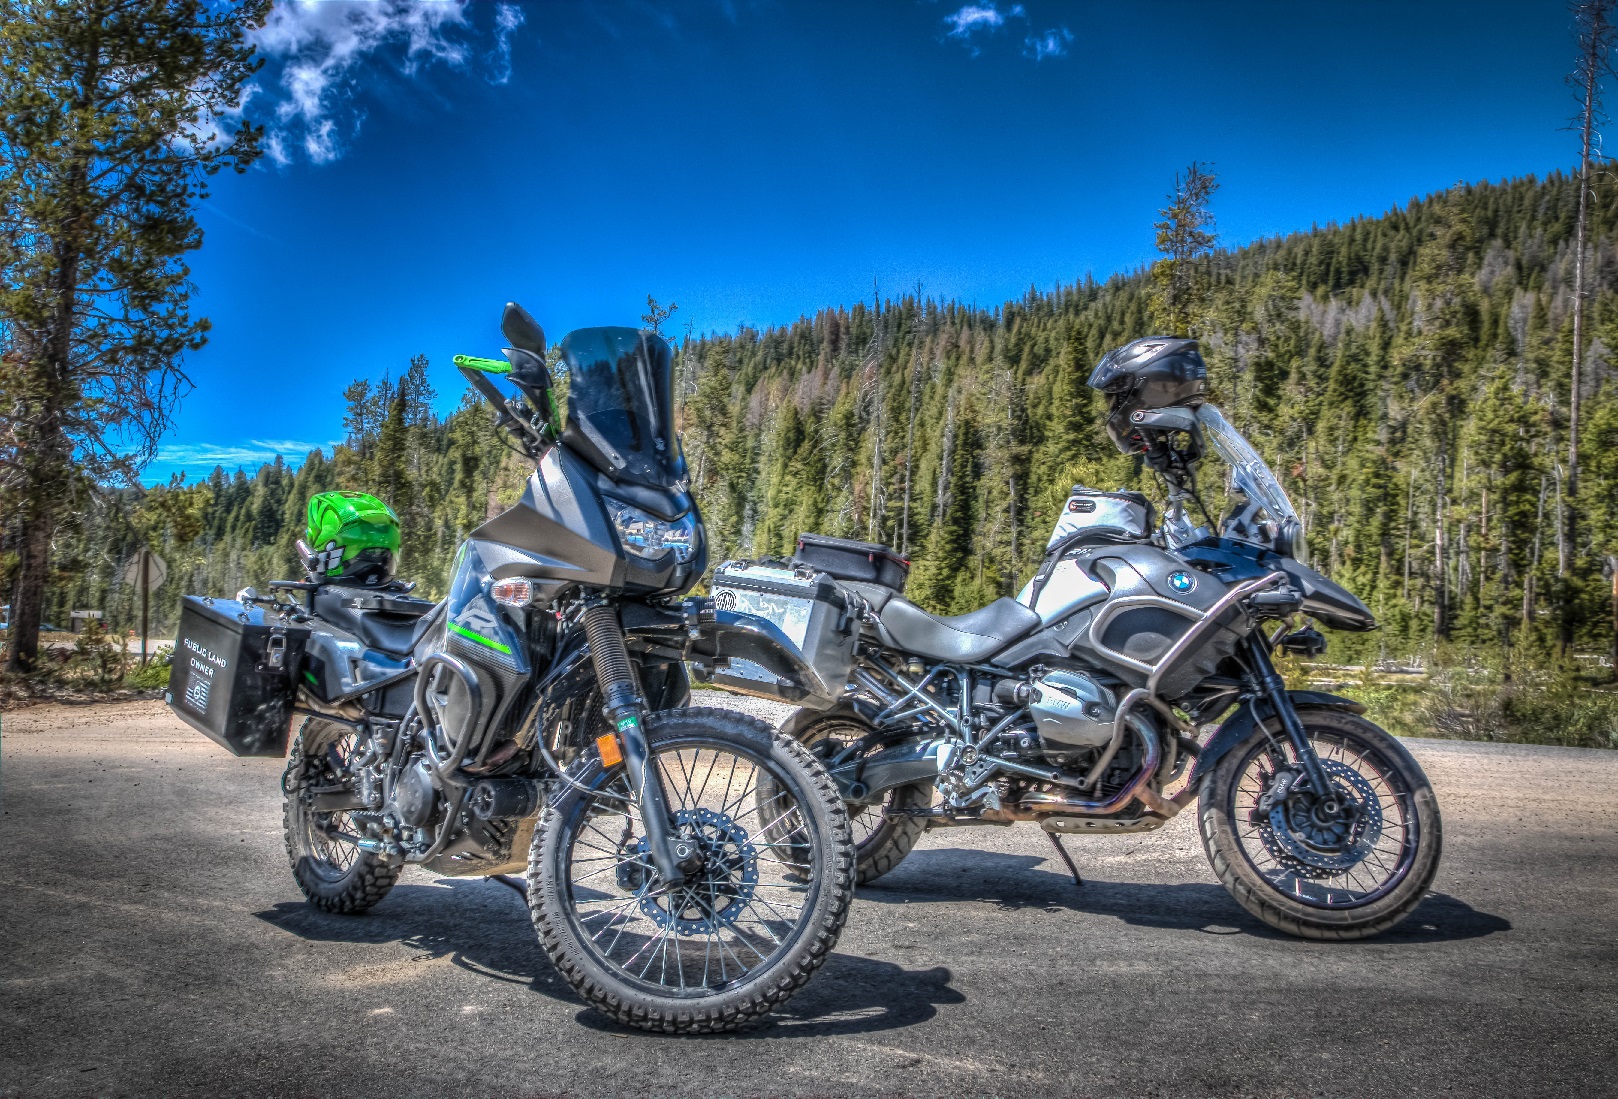 KLR 650 and BMW ADV Motorcycles